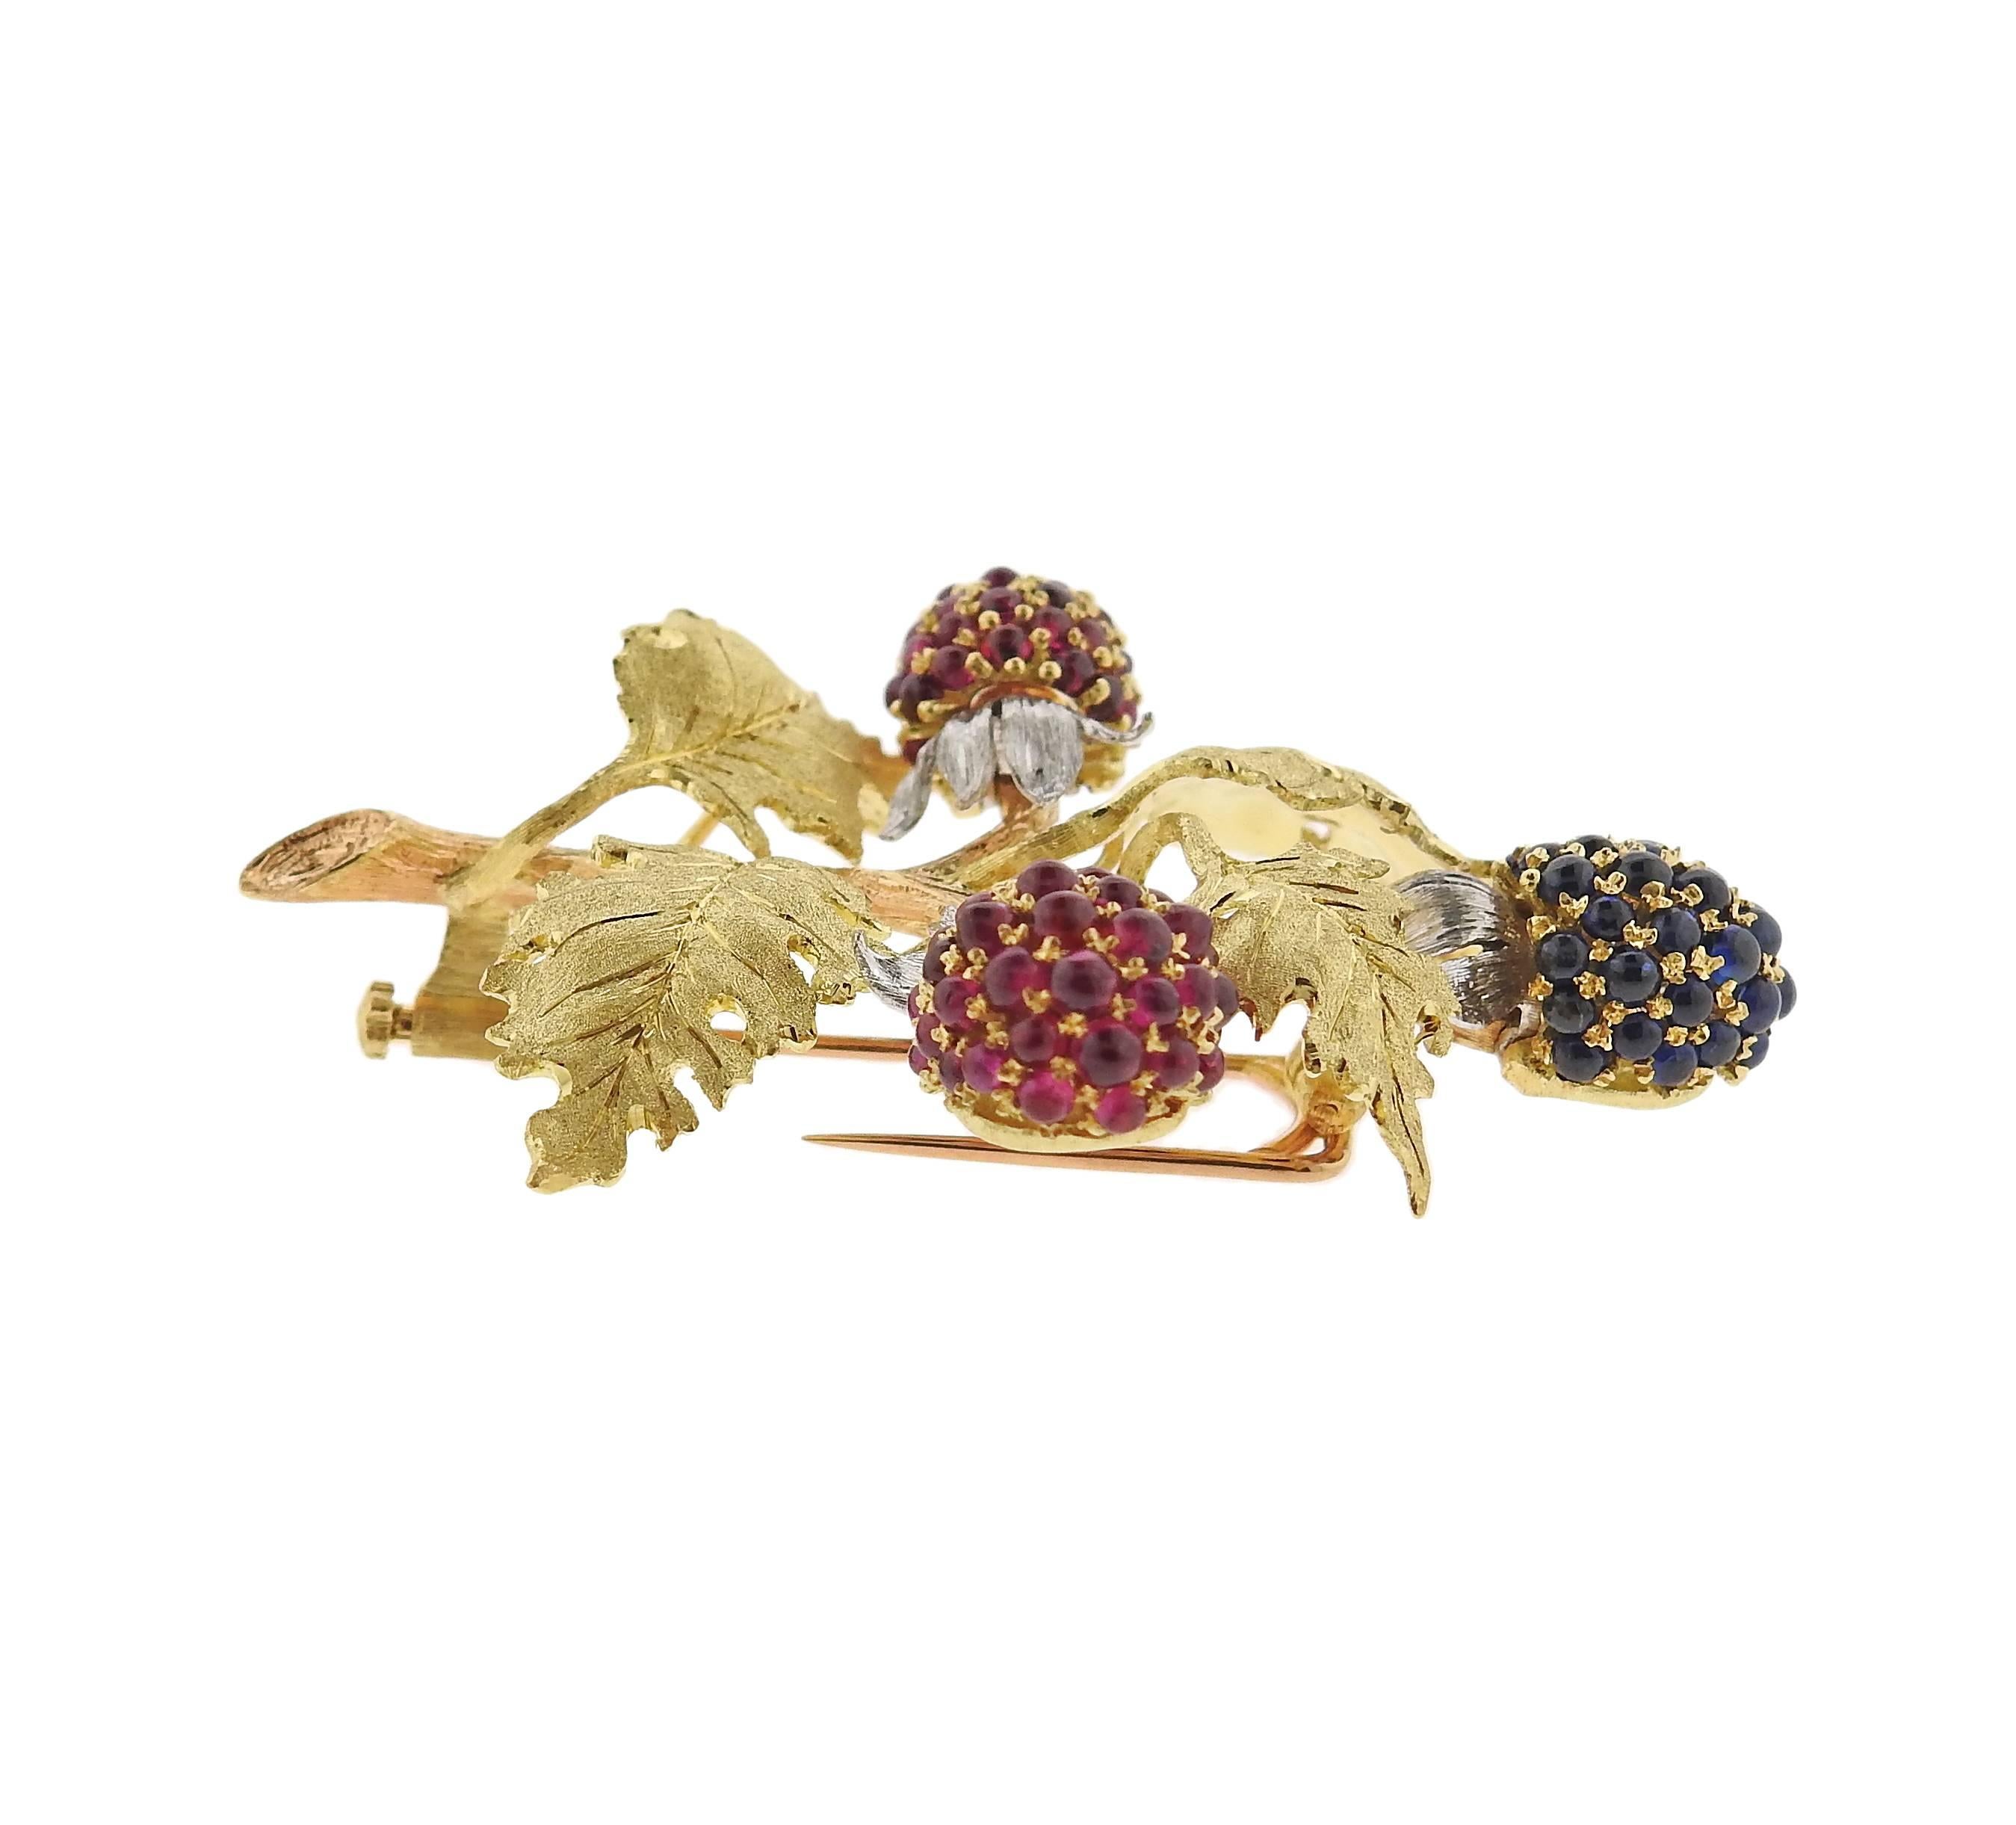 An 18k yellow, rose and white gold brooch, crafted by Buccellati , featuring berries, adorned with rubies and sapphires. Brooch is 55mm x 40mm. Marked: Buccellati, Italy, 750, 18k. Weight of the piece - 20.3 grams.
With pouch. Retail $29800.